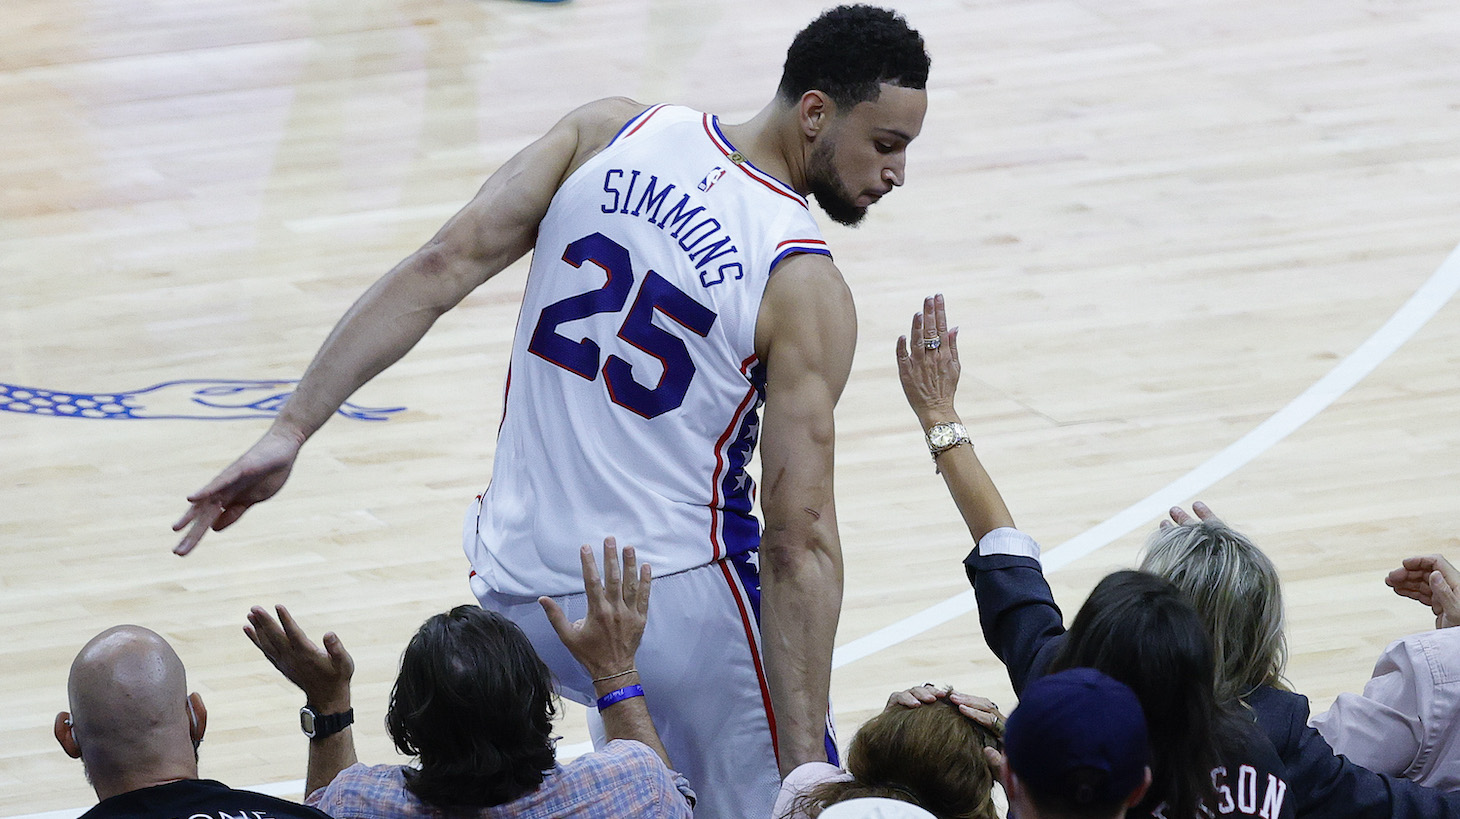 PHILADELPHIA, PENNSYLVANIA - JUNE 20: Ben Simmons #25 of the Philadelphia 76ers bumps into fans during the fourth quarter during Game Seven of the Eastern Conference Semifinals against the Atlanta Hawks at Wells Fargo Center on June 20, 2021 in Philadelphia, Pennsylvania. NOTE TO USER: User expressly acknowledges and agrees that, by downloading and or using this photograph, User is consenting to the terms and conditions of the Getty Images License Agreement. (Photo by Tim Nwachukwu/Getty Images)